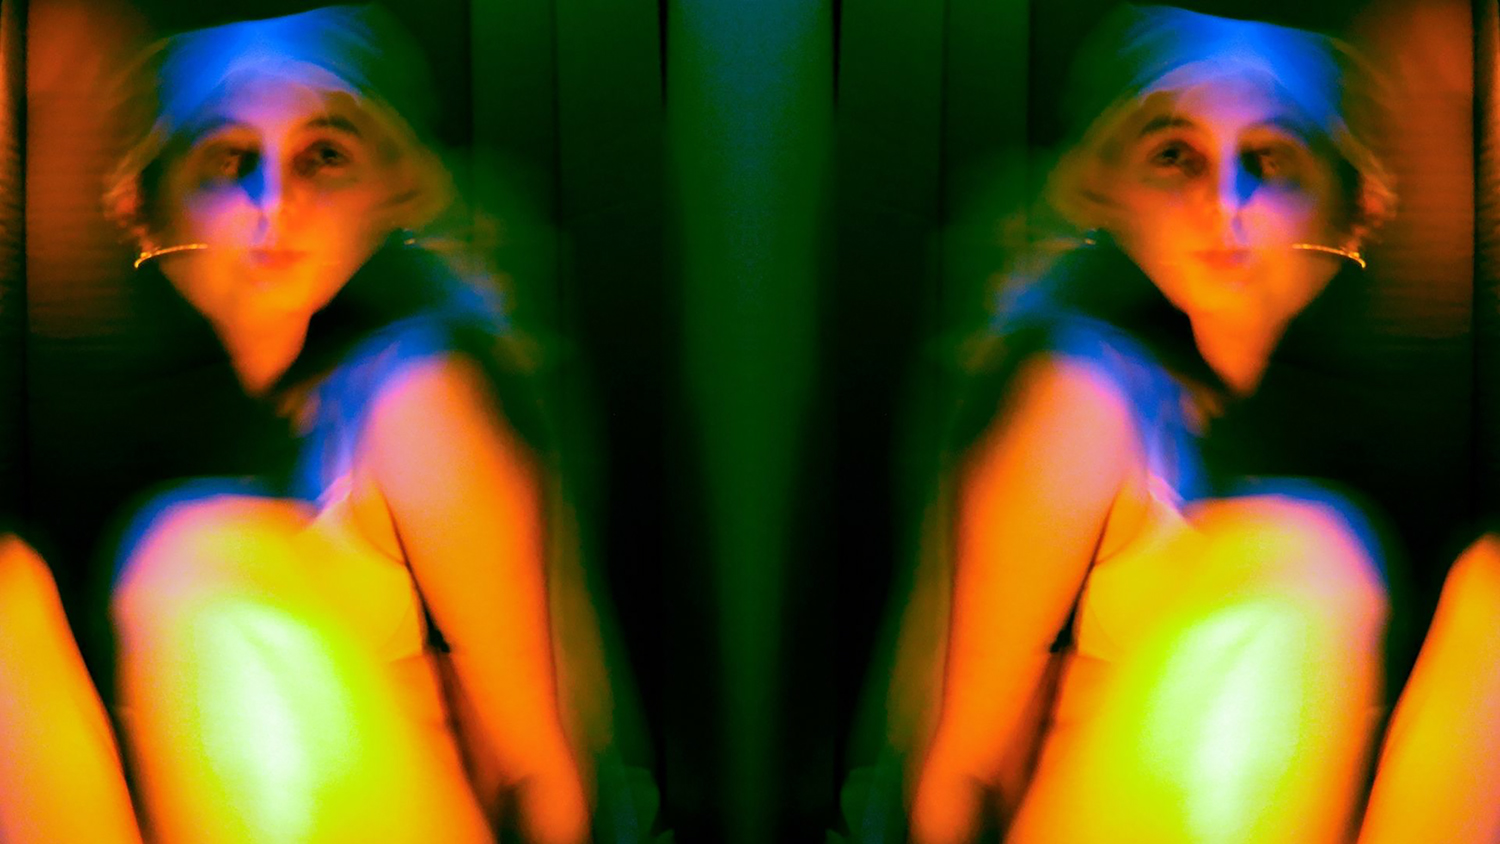 A series of brightly coloured and contrasting photographs of abstract self portraiture. 